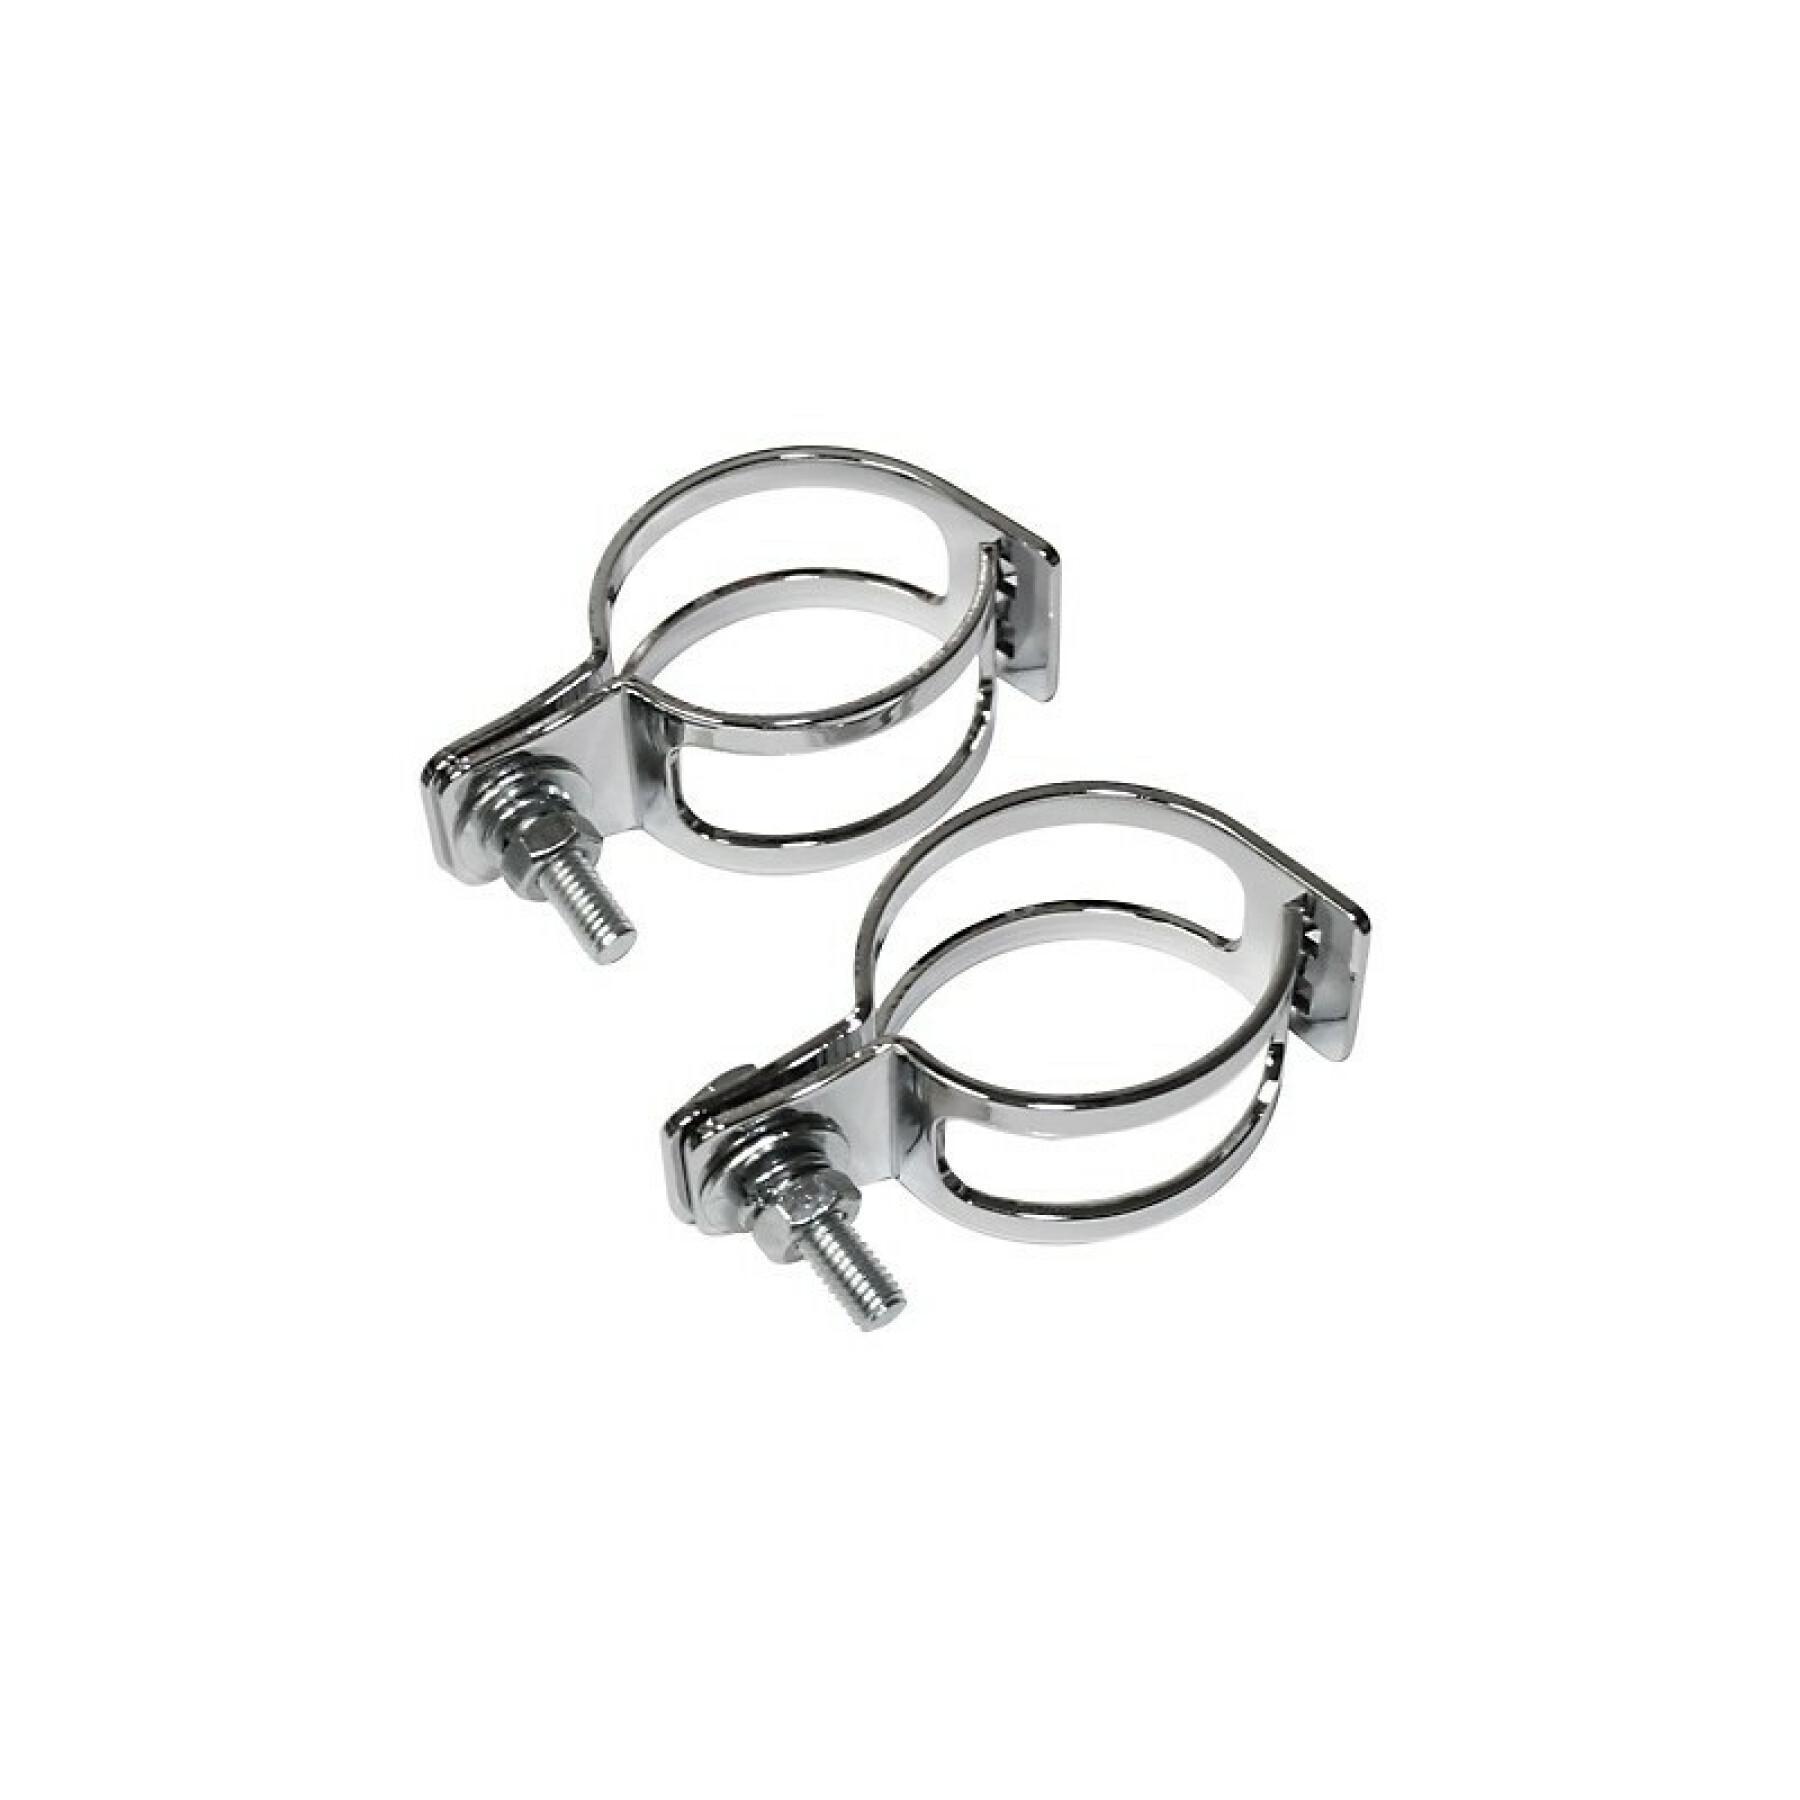 Pair of pipe clamps Brazoline